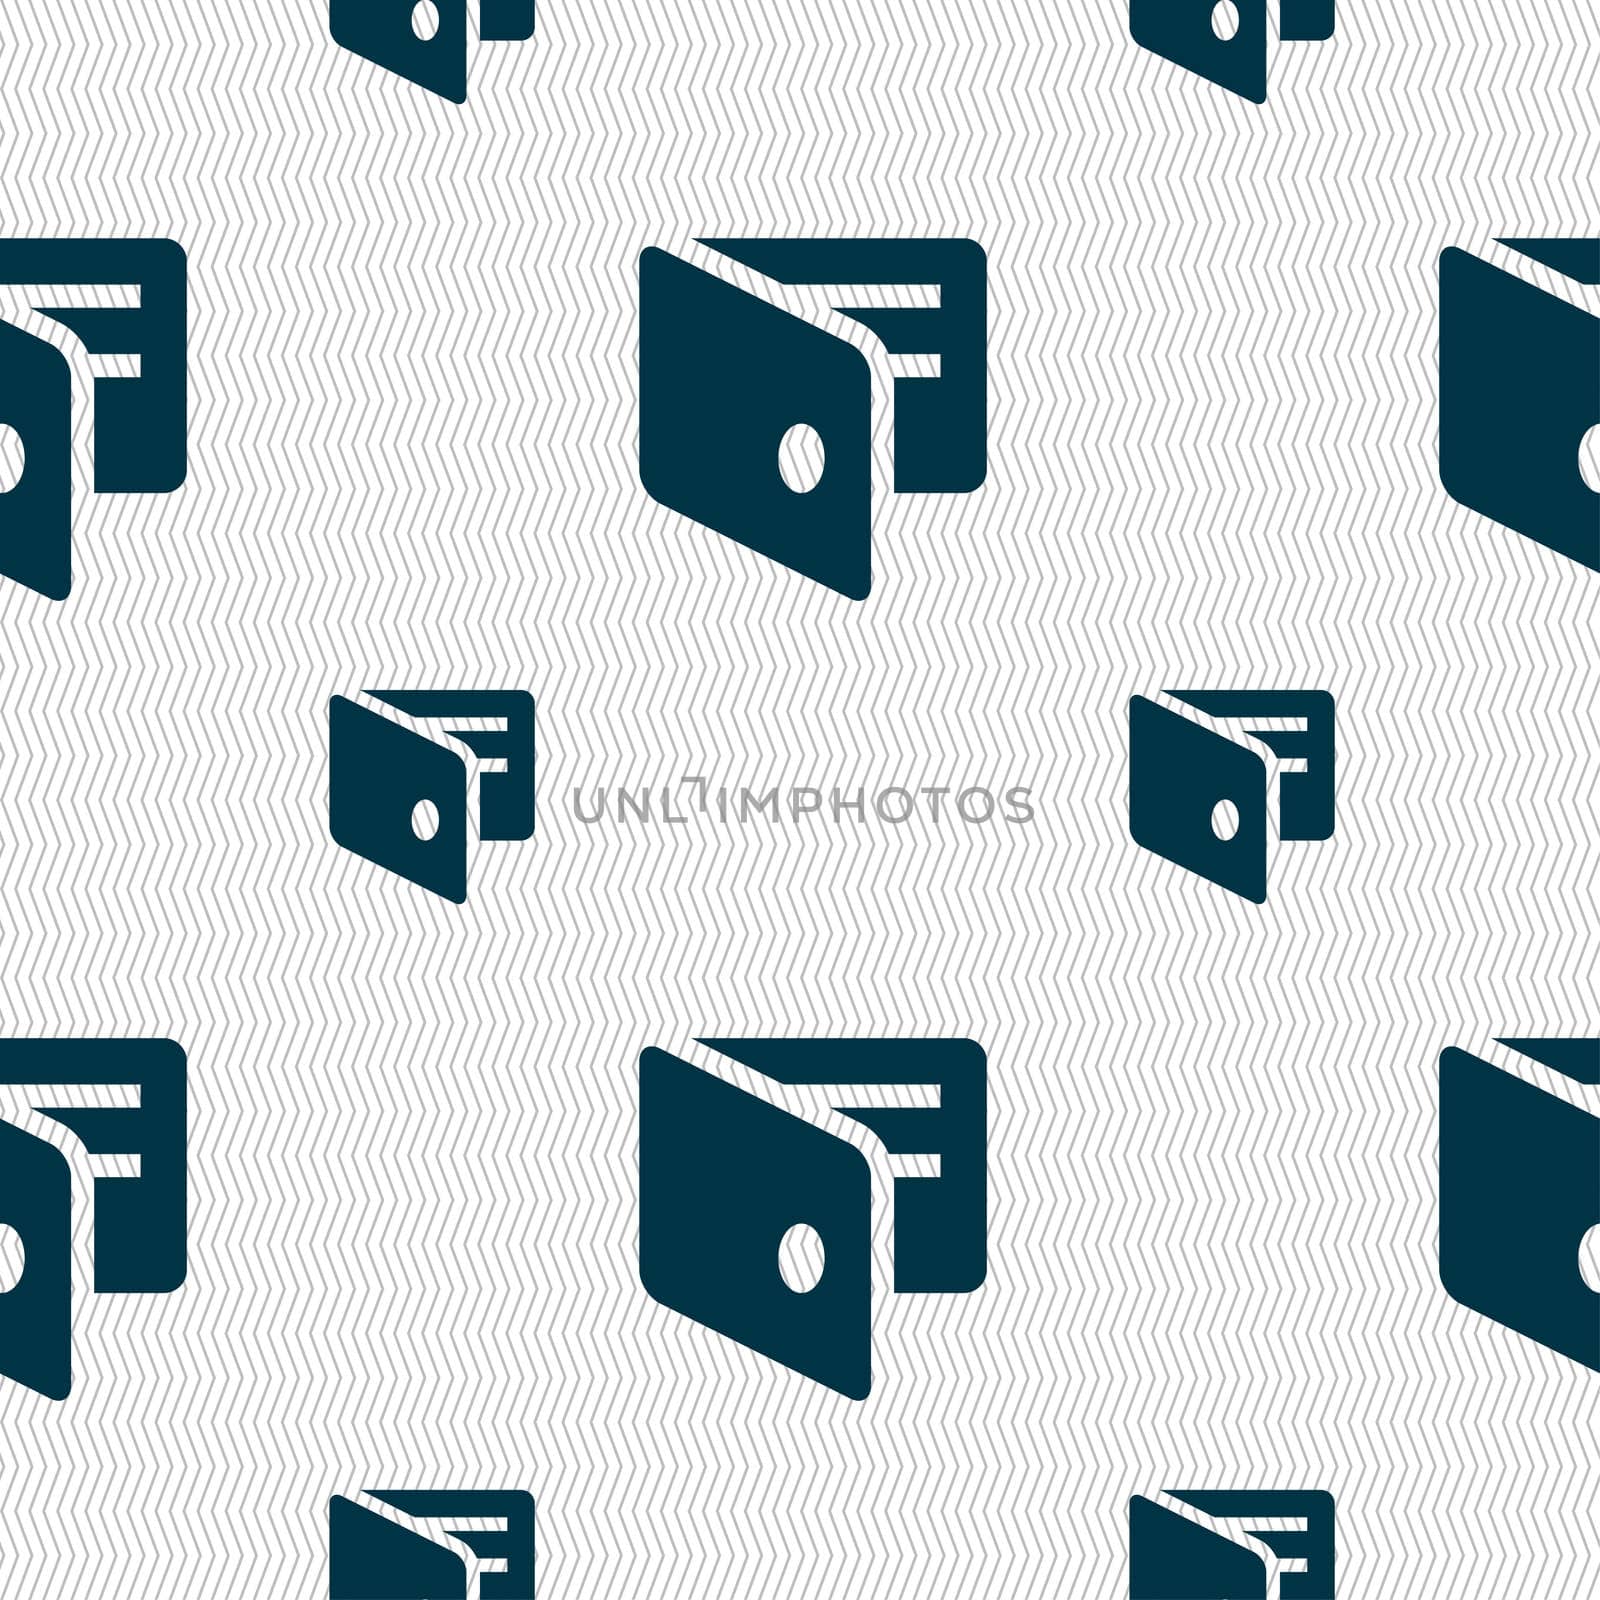 eWallet, Electronic wallet, Business Card Holder icon sign. Seamless pattern with geometric texture. illustration